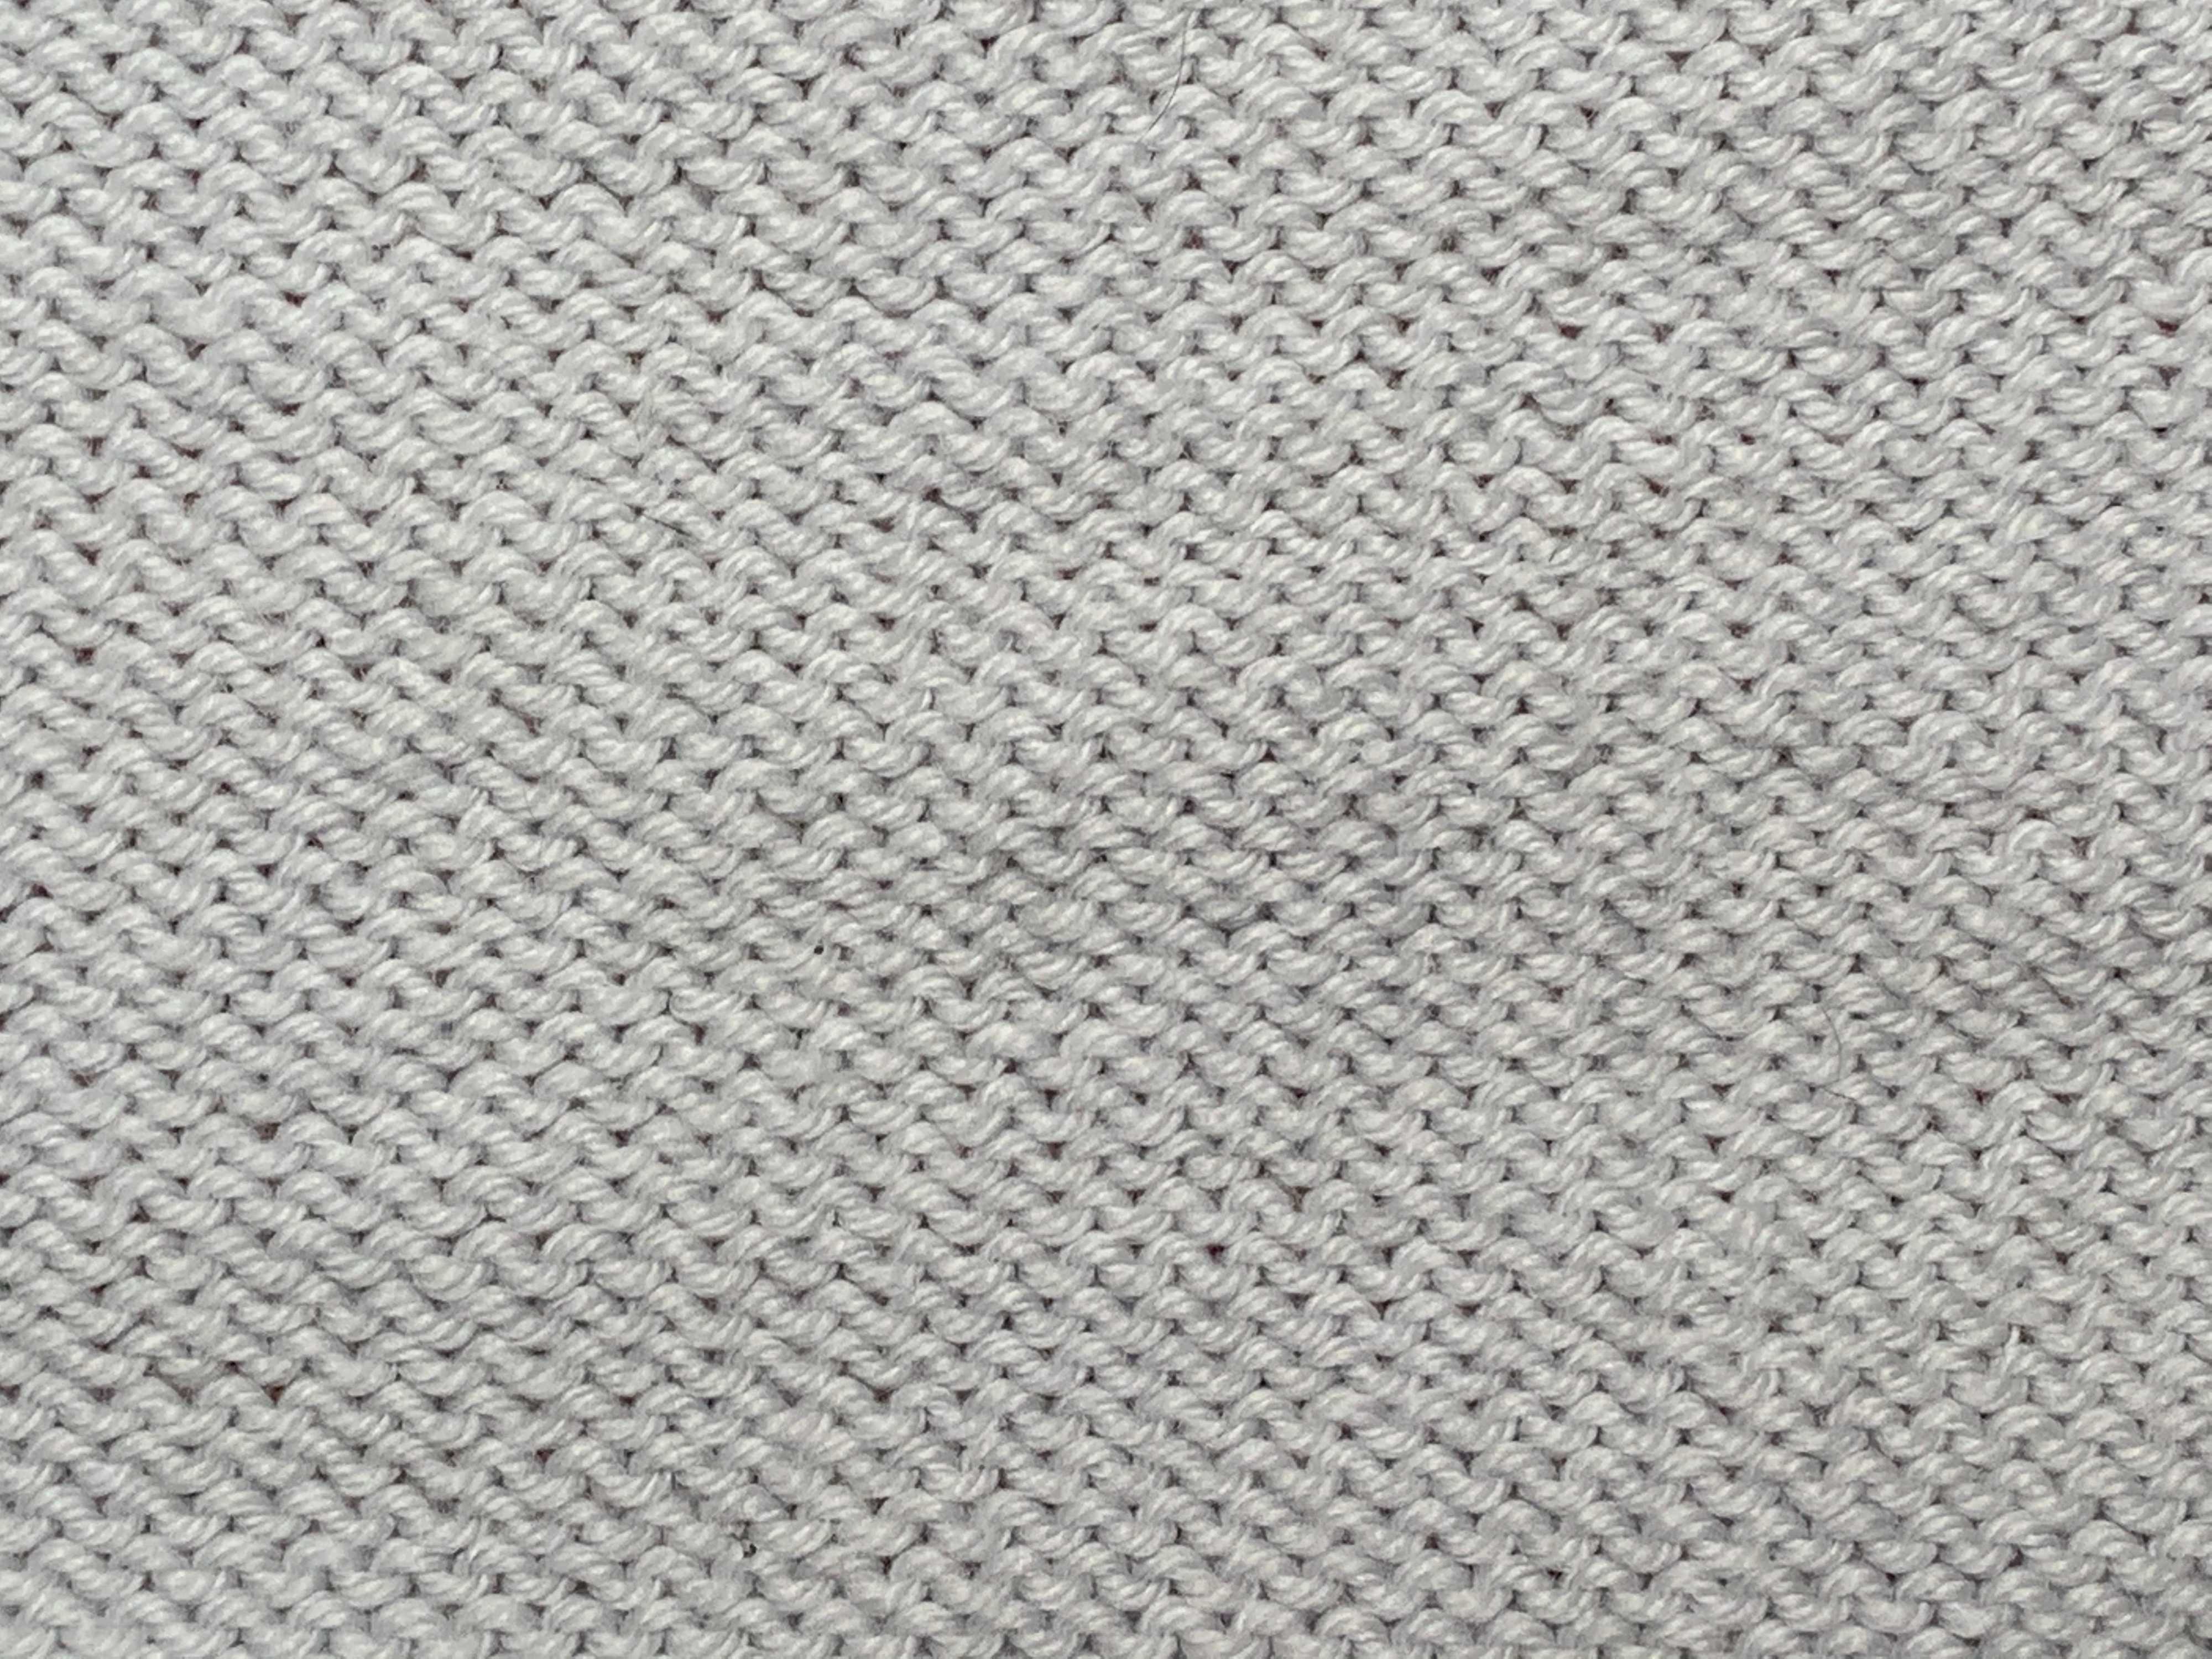 The right side of reverse stockinette, characterized by rows of purl bumps